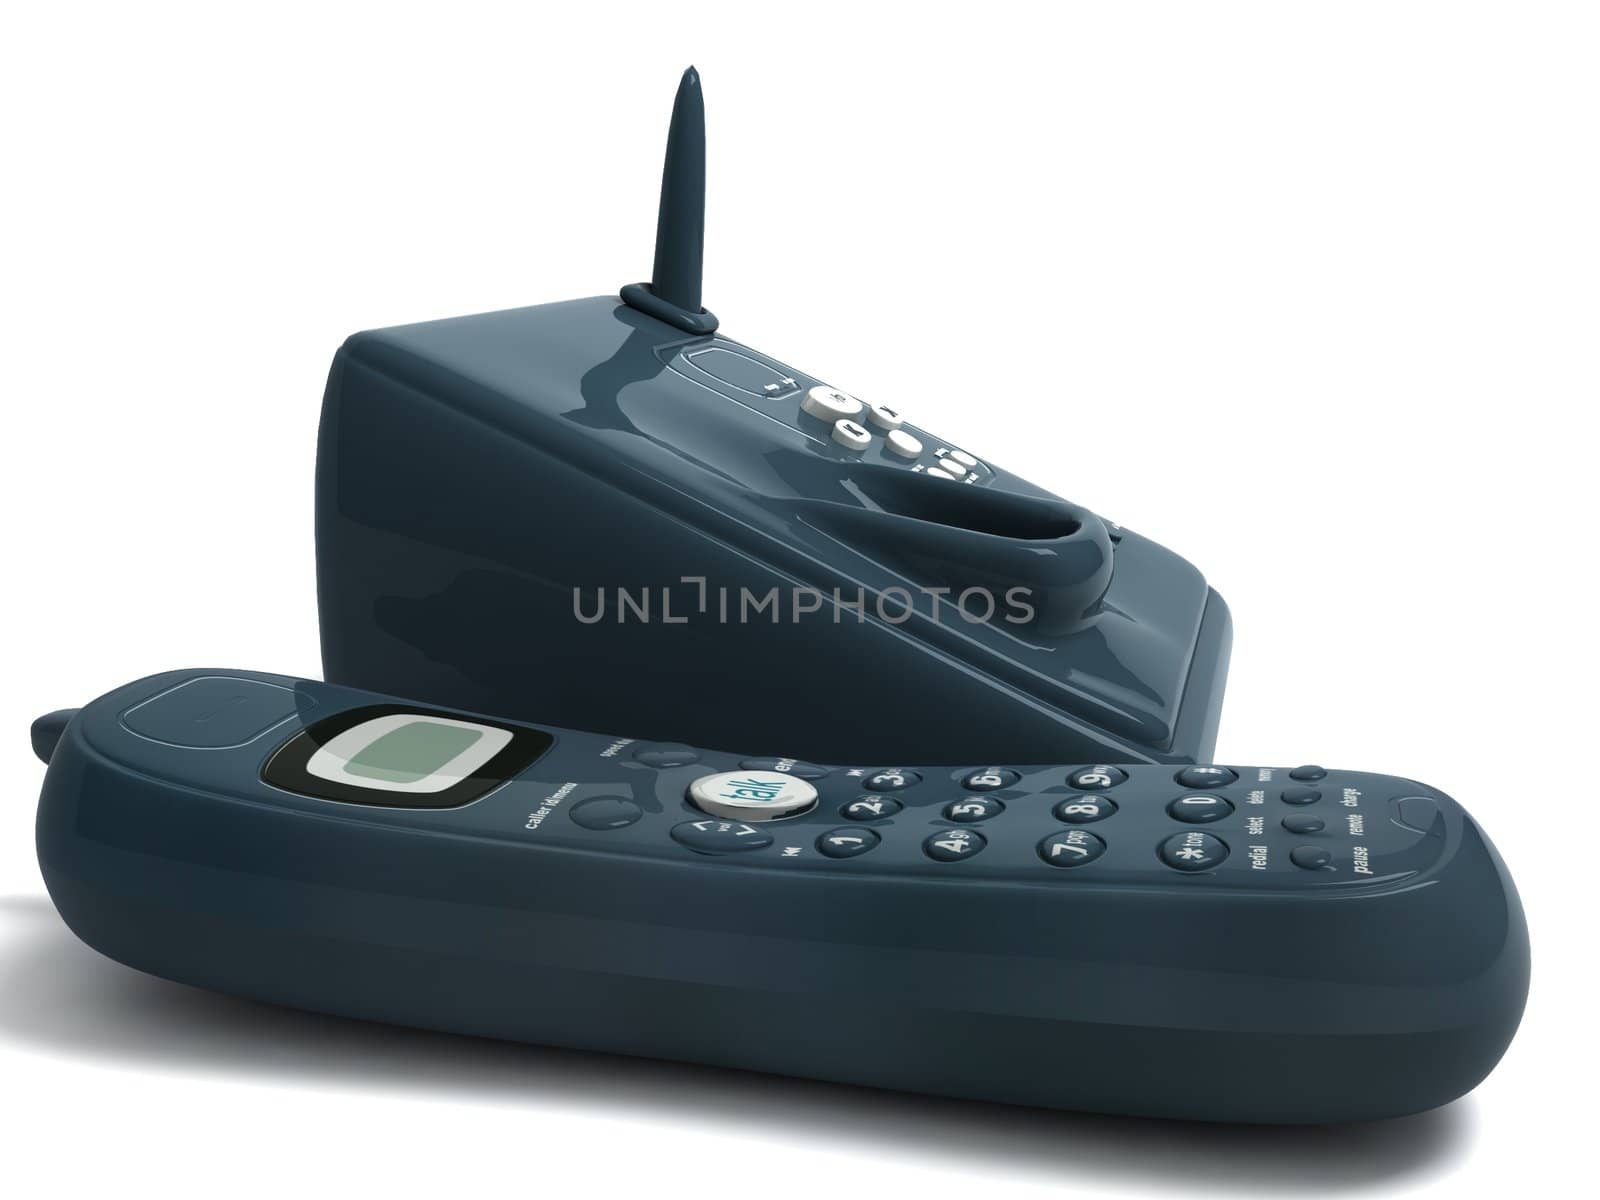 three dimensional black cordless phone on an isolated background

